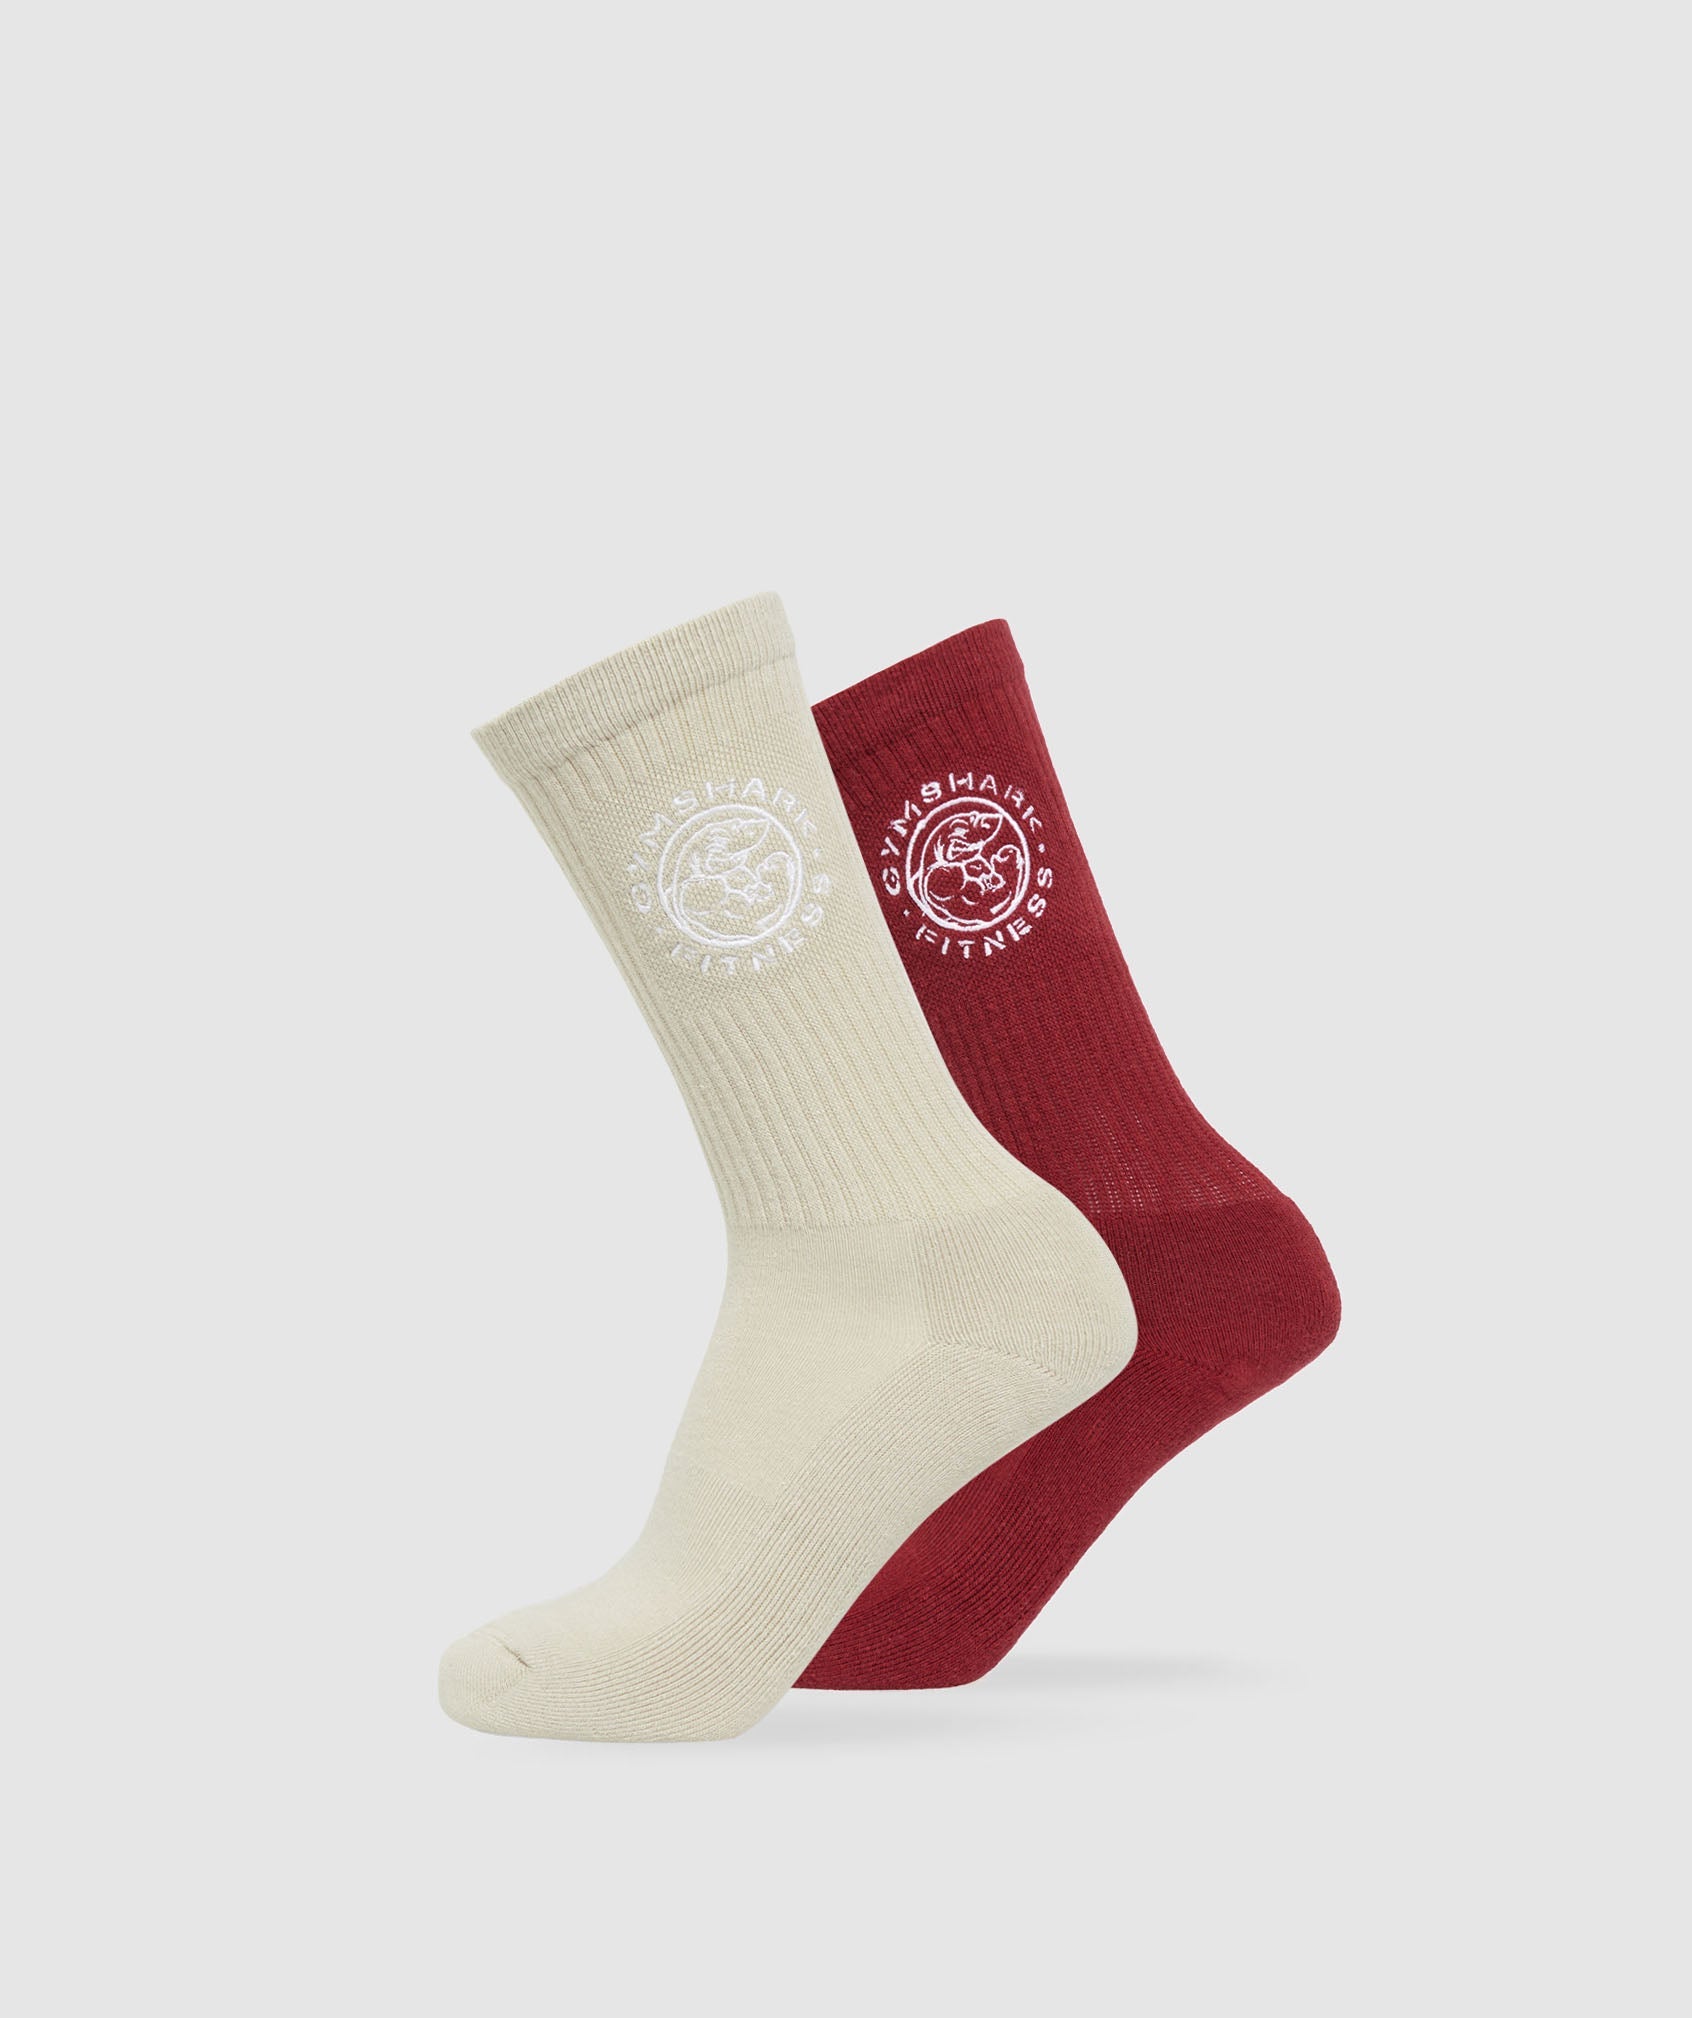 Legacy Crew Socks 2pk in Pebble Grey/Washed Red